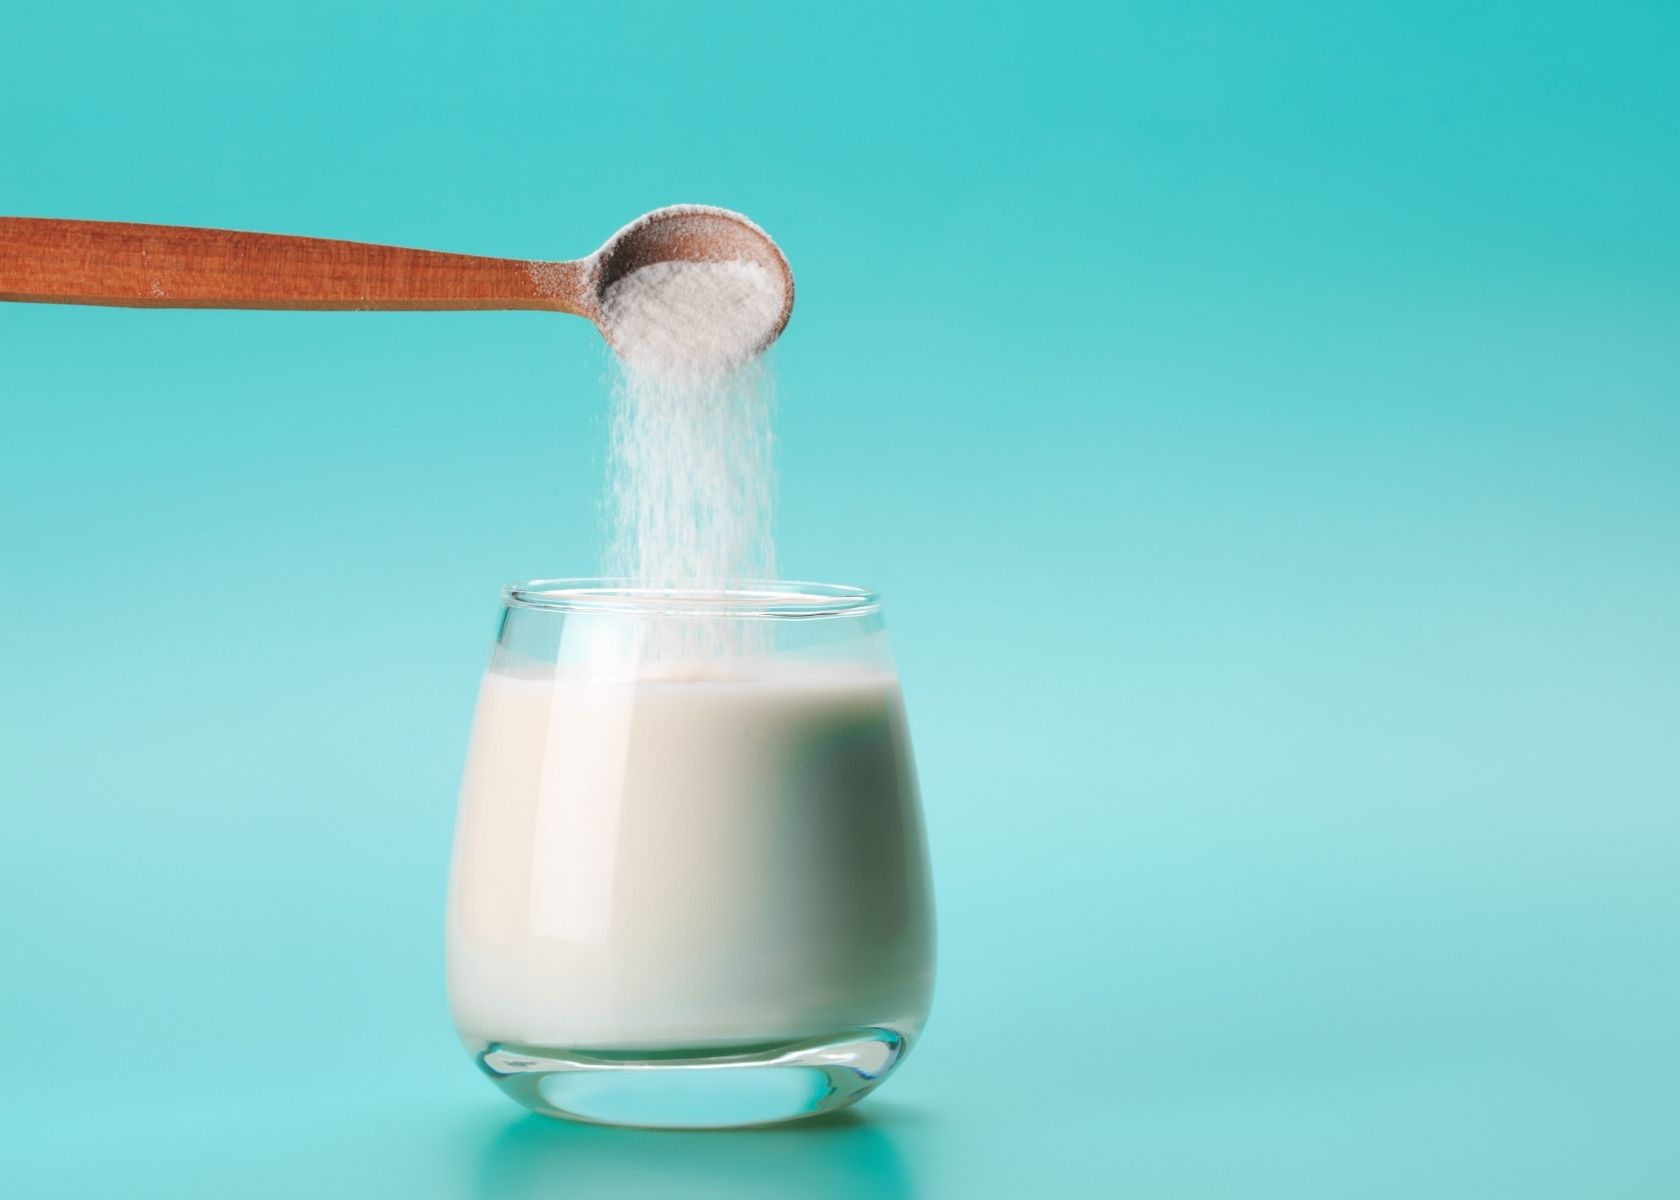 Powdered milk is poured into glass of liquid milk with tiny wooden spoon.